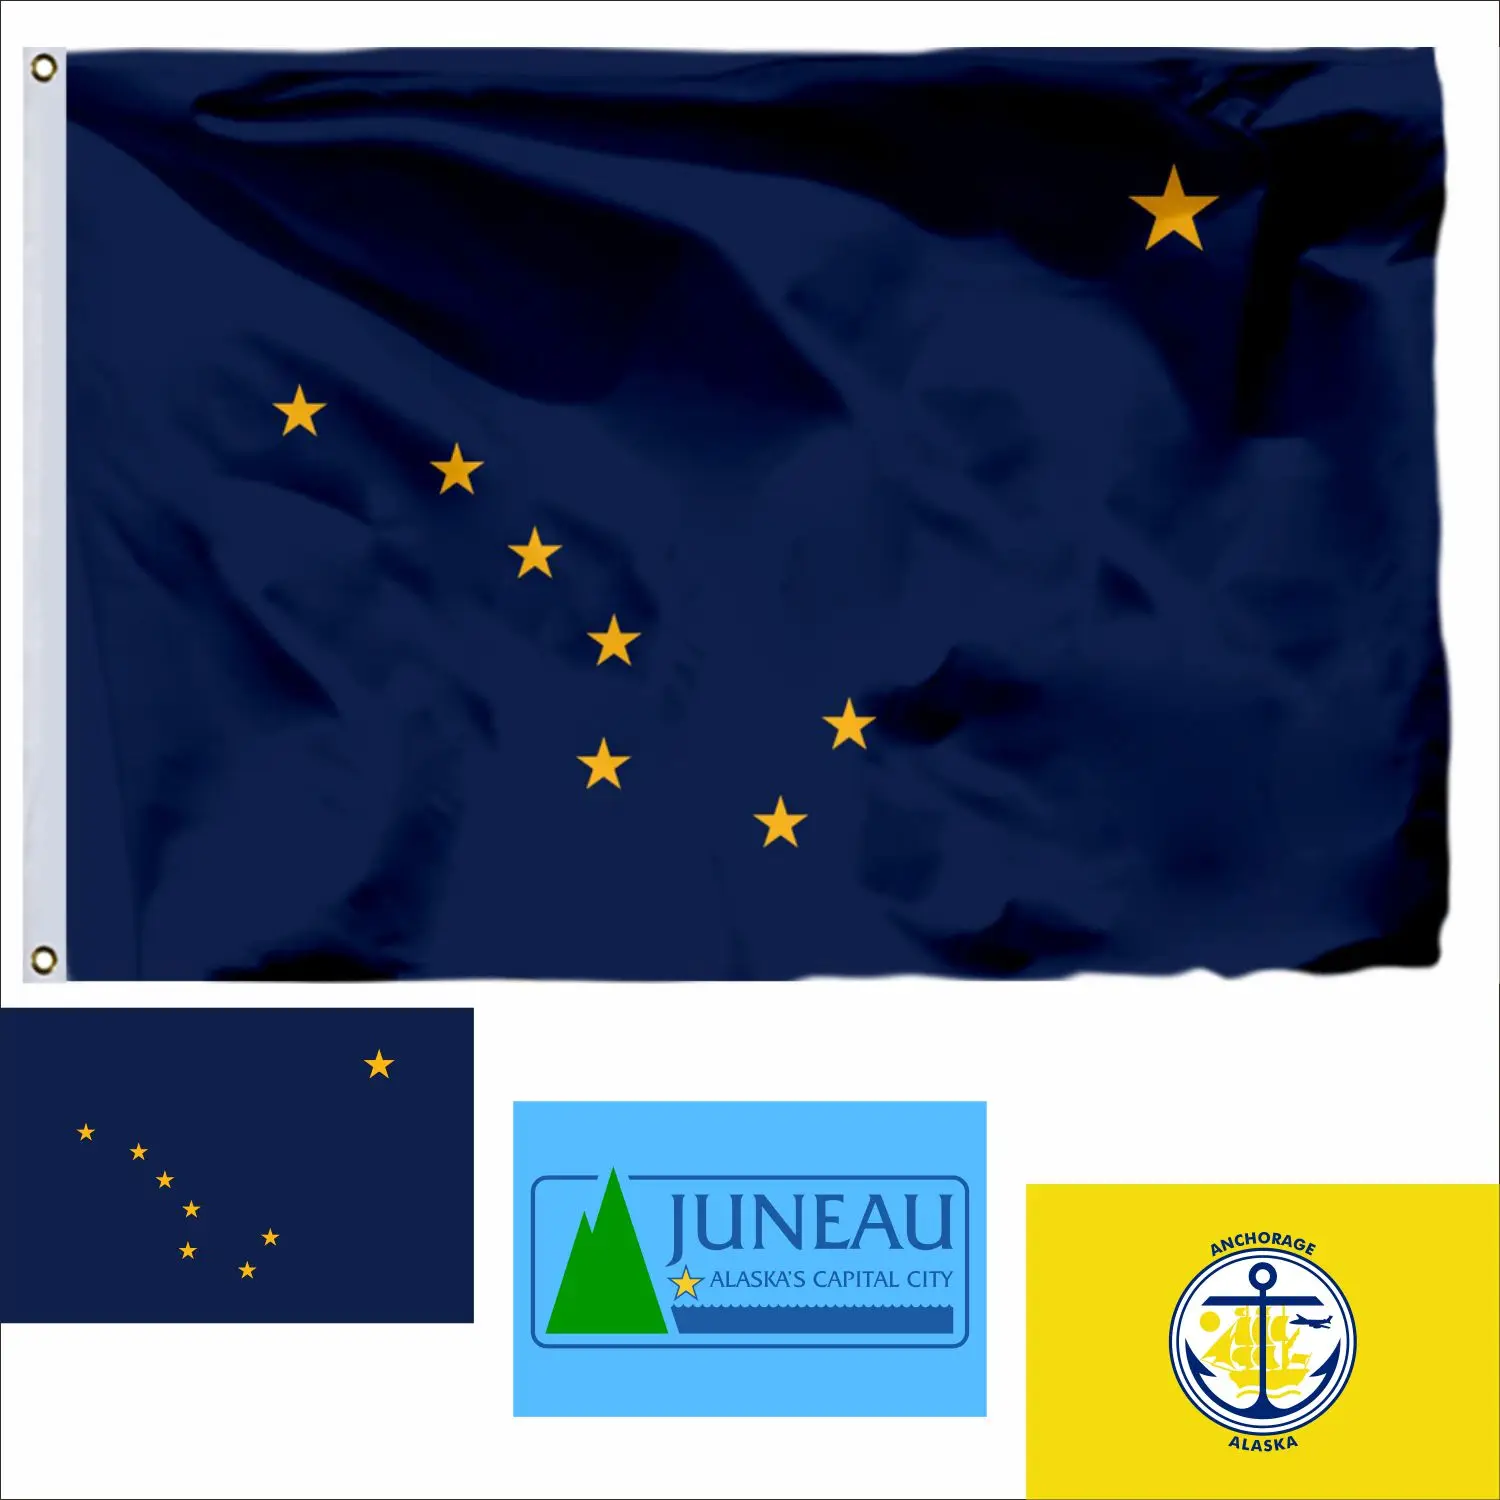 

USA Alaska Flag 90x150cm Juneau 3x5ft US Guanica American United States Flags and Anchorage Islands Banners